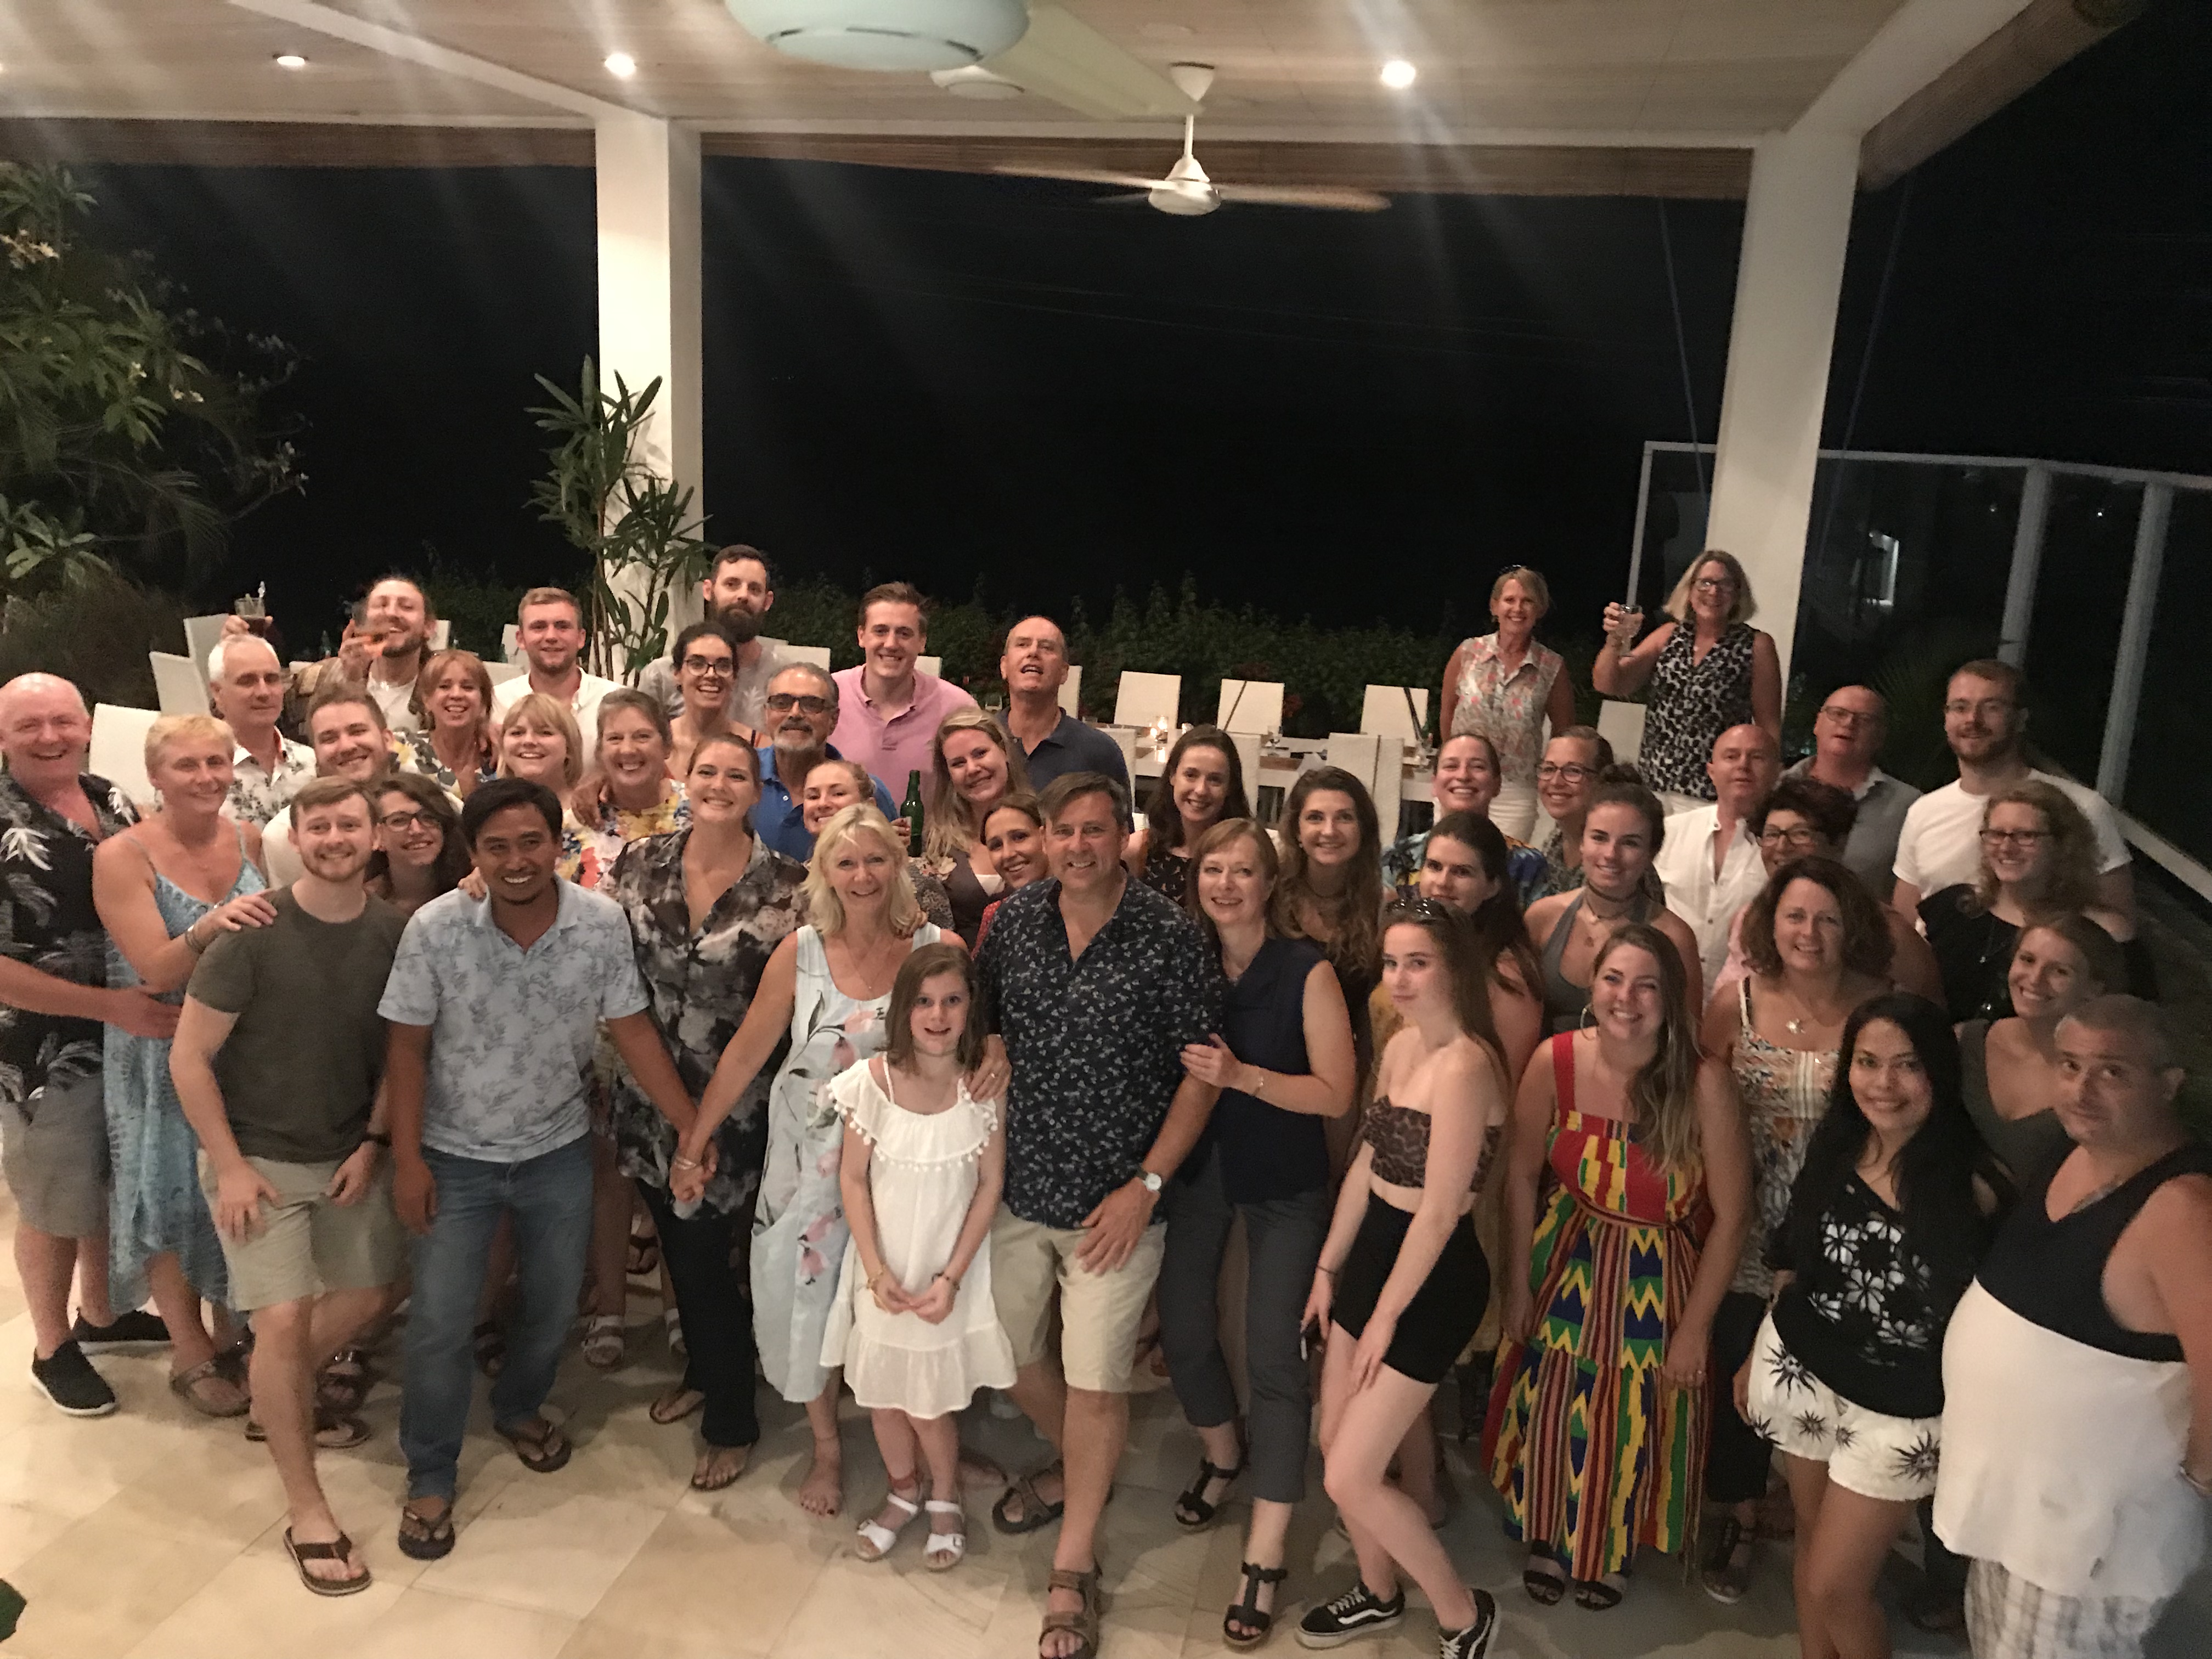 All of the Scuba Divers, Snorkelers, friends and family of the wedding at Sails restaurant in Amed 